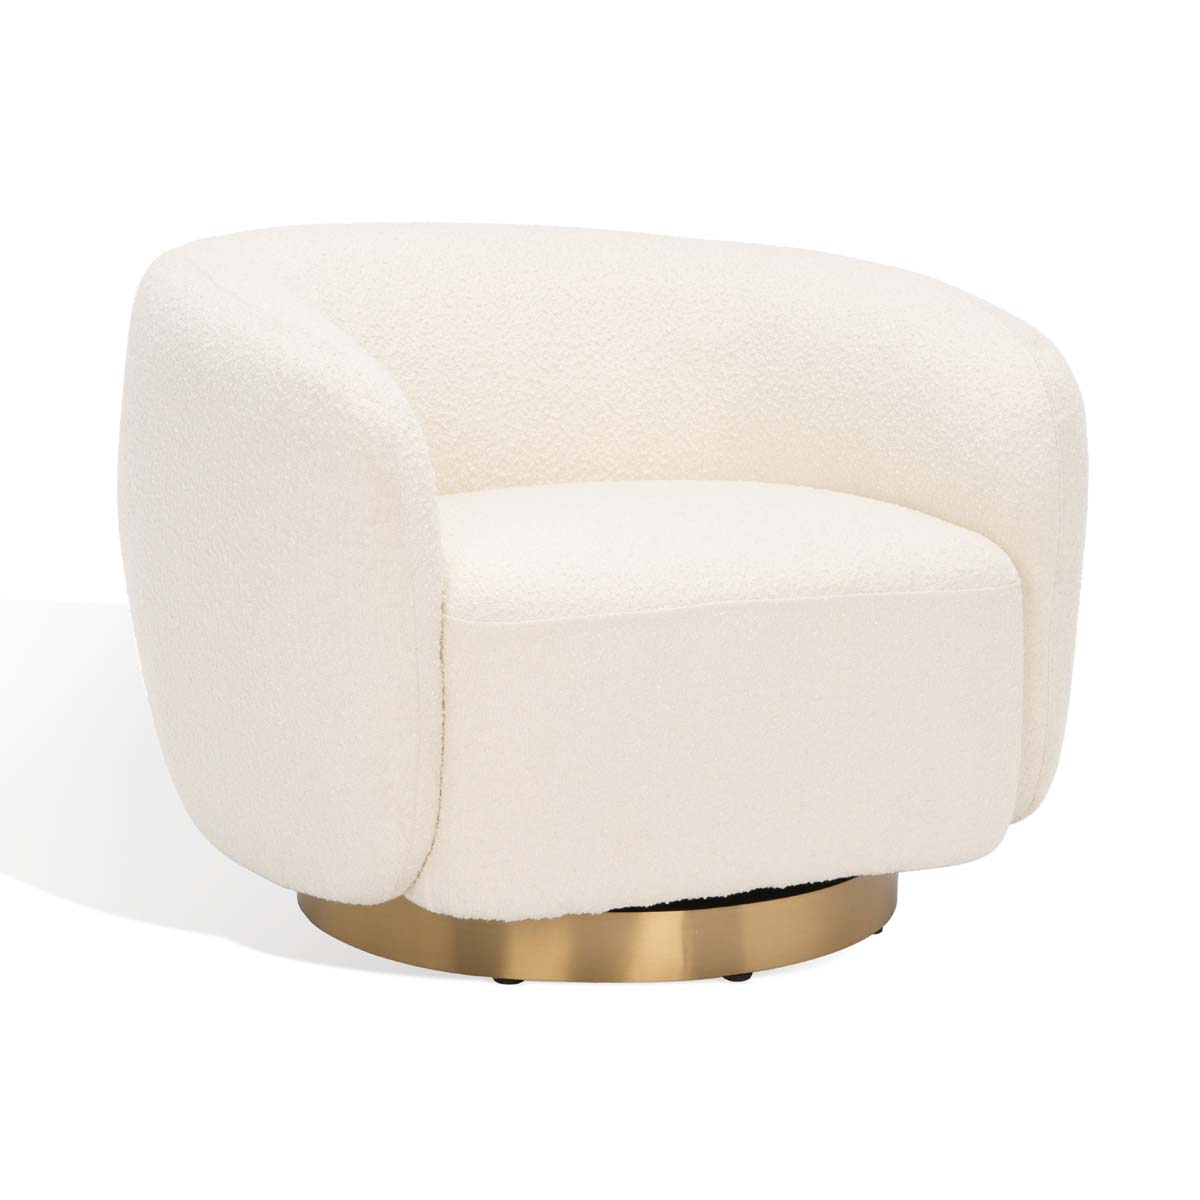 Safavieh Couture Bernard Boucle Swivel Accent Chair - Ivory / Gold